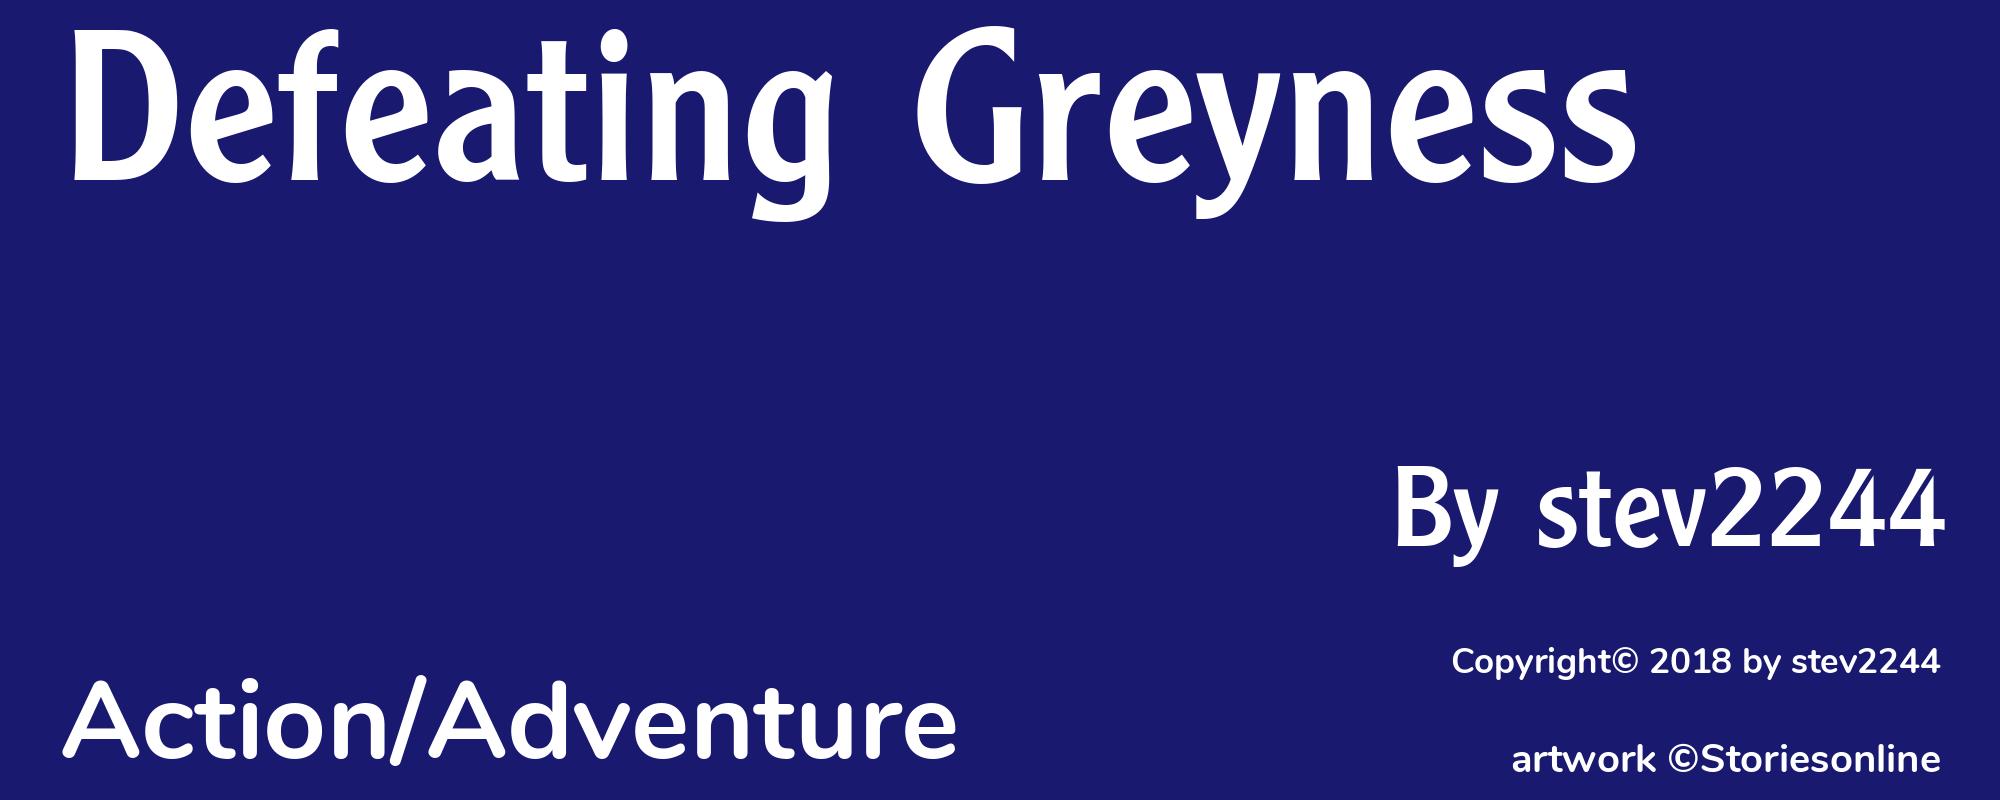 Defeating Greyness - Cover